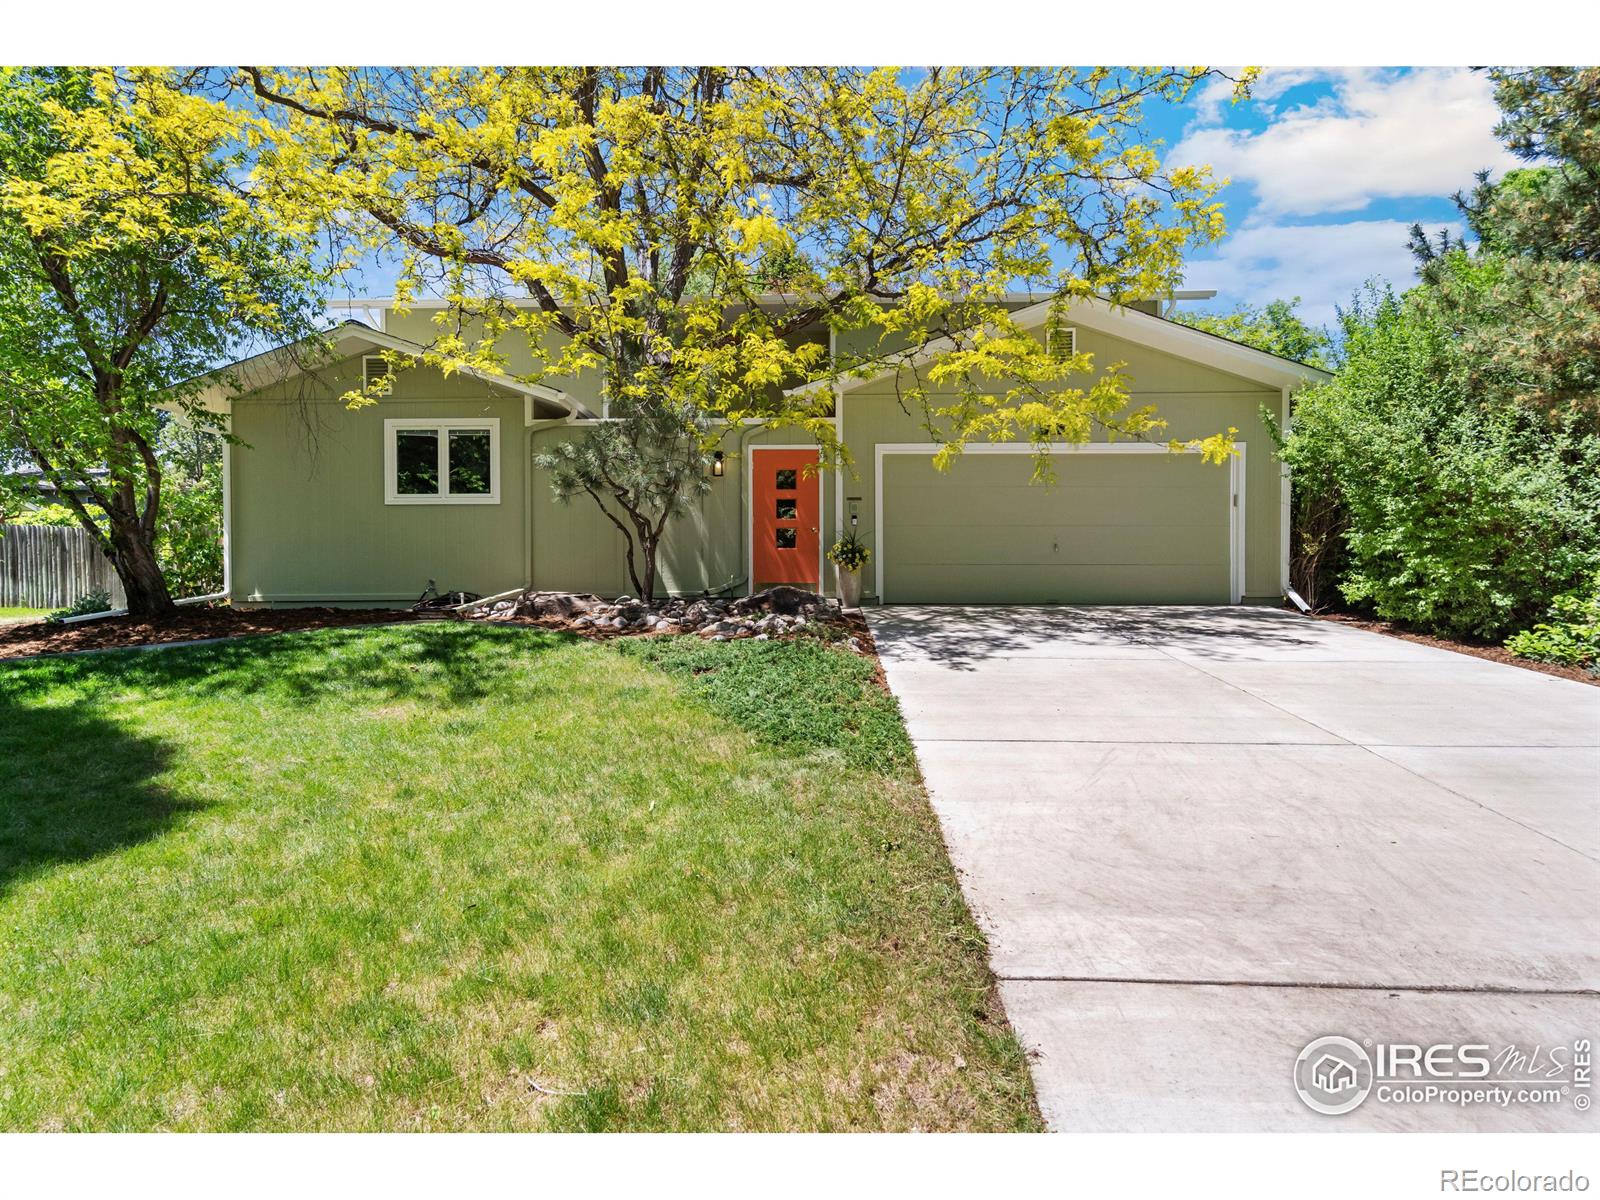 2301  Tanglewood Drive, fort collins MLS: 4567891010488 Beds: 4 Baths: 3 Price: $680,000